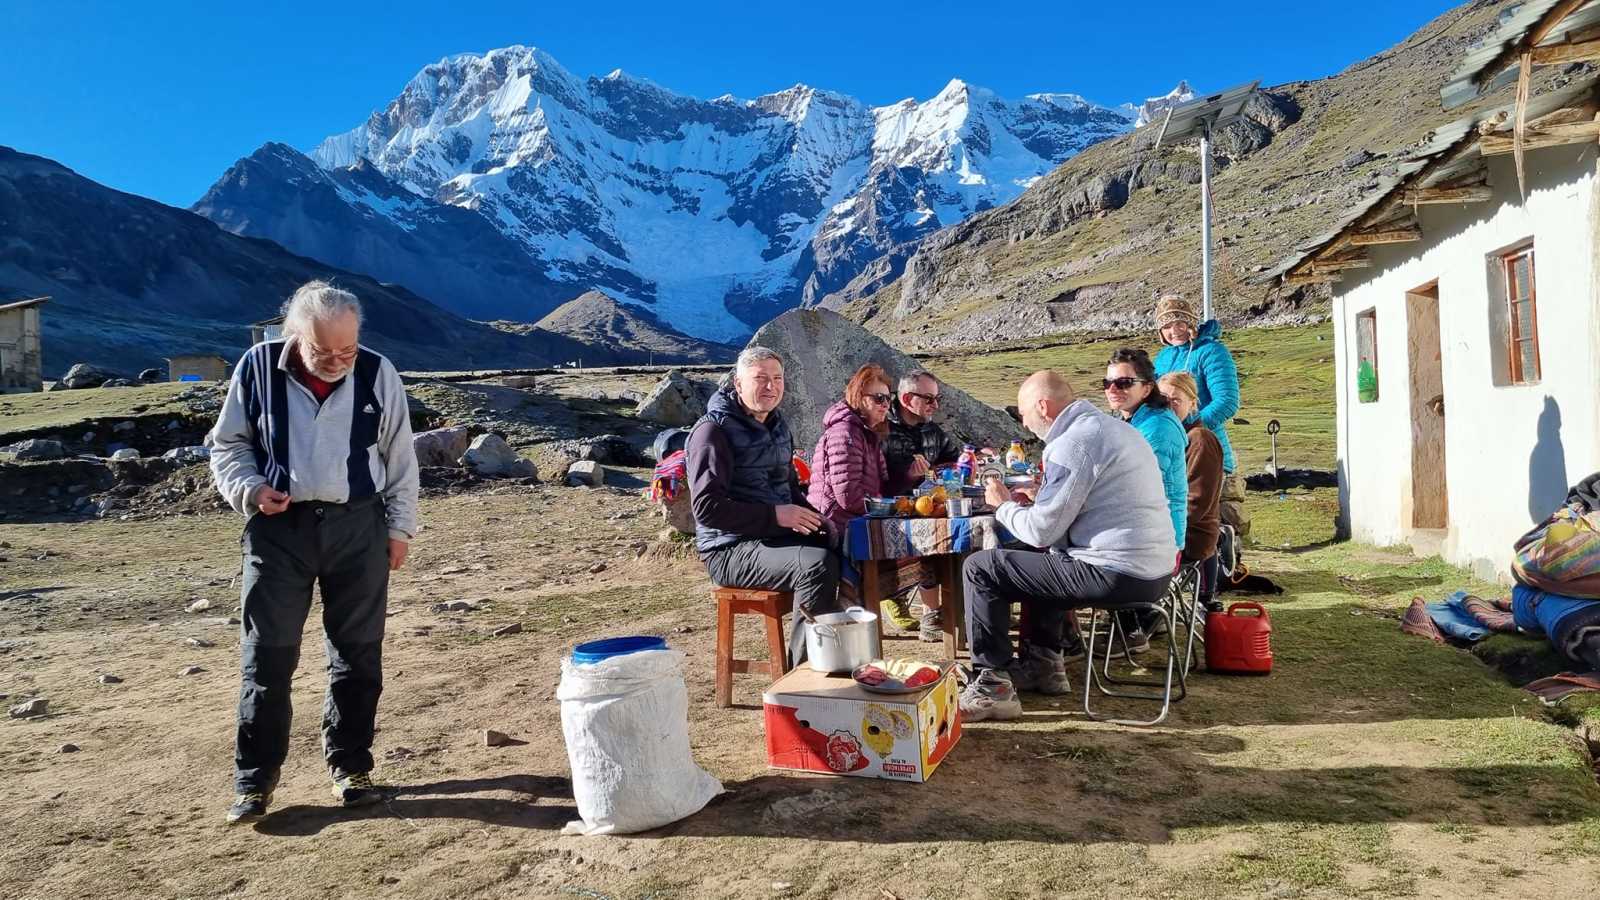 Having breakfast at the Upis Camp on the Ausangate and Rainbow Mountain route.